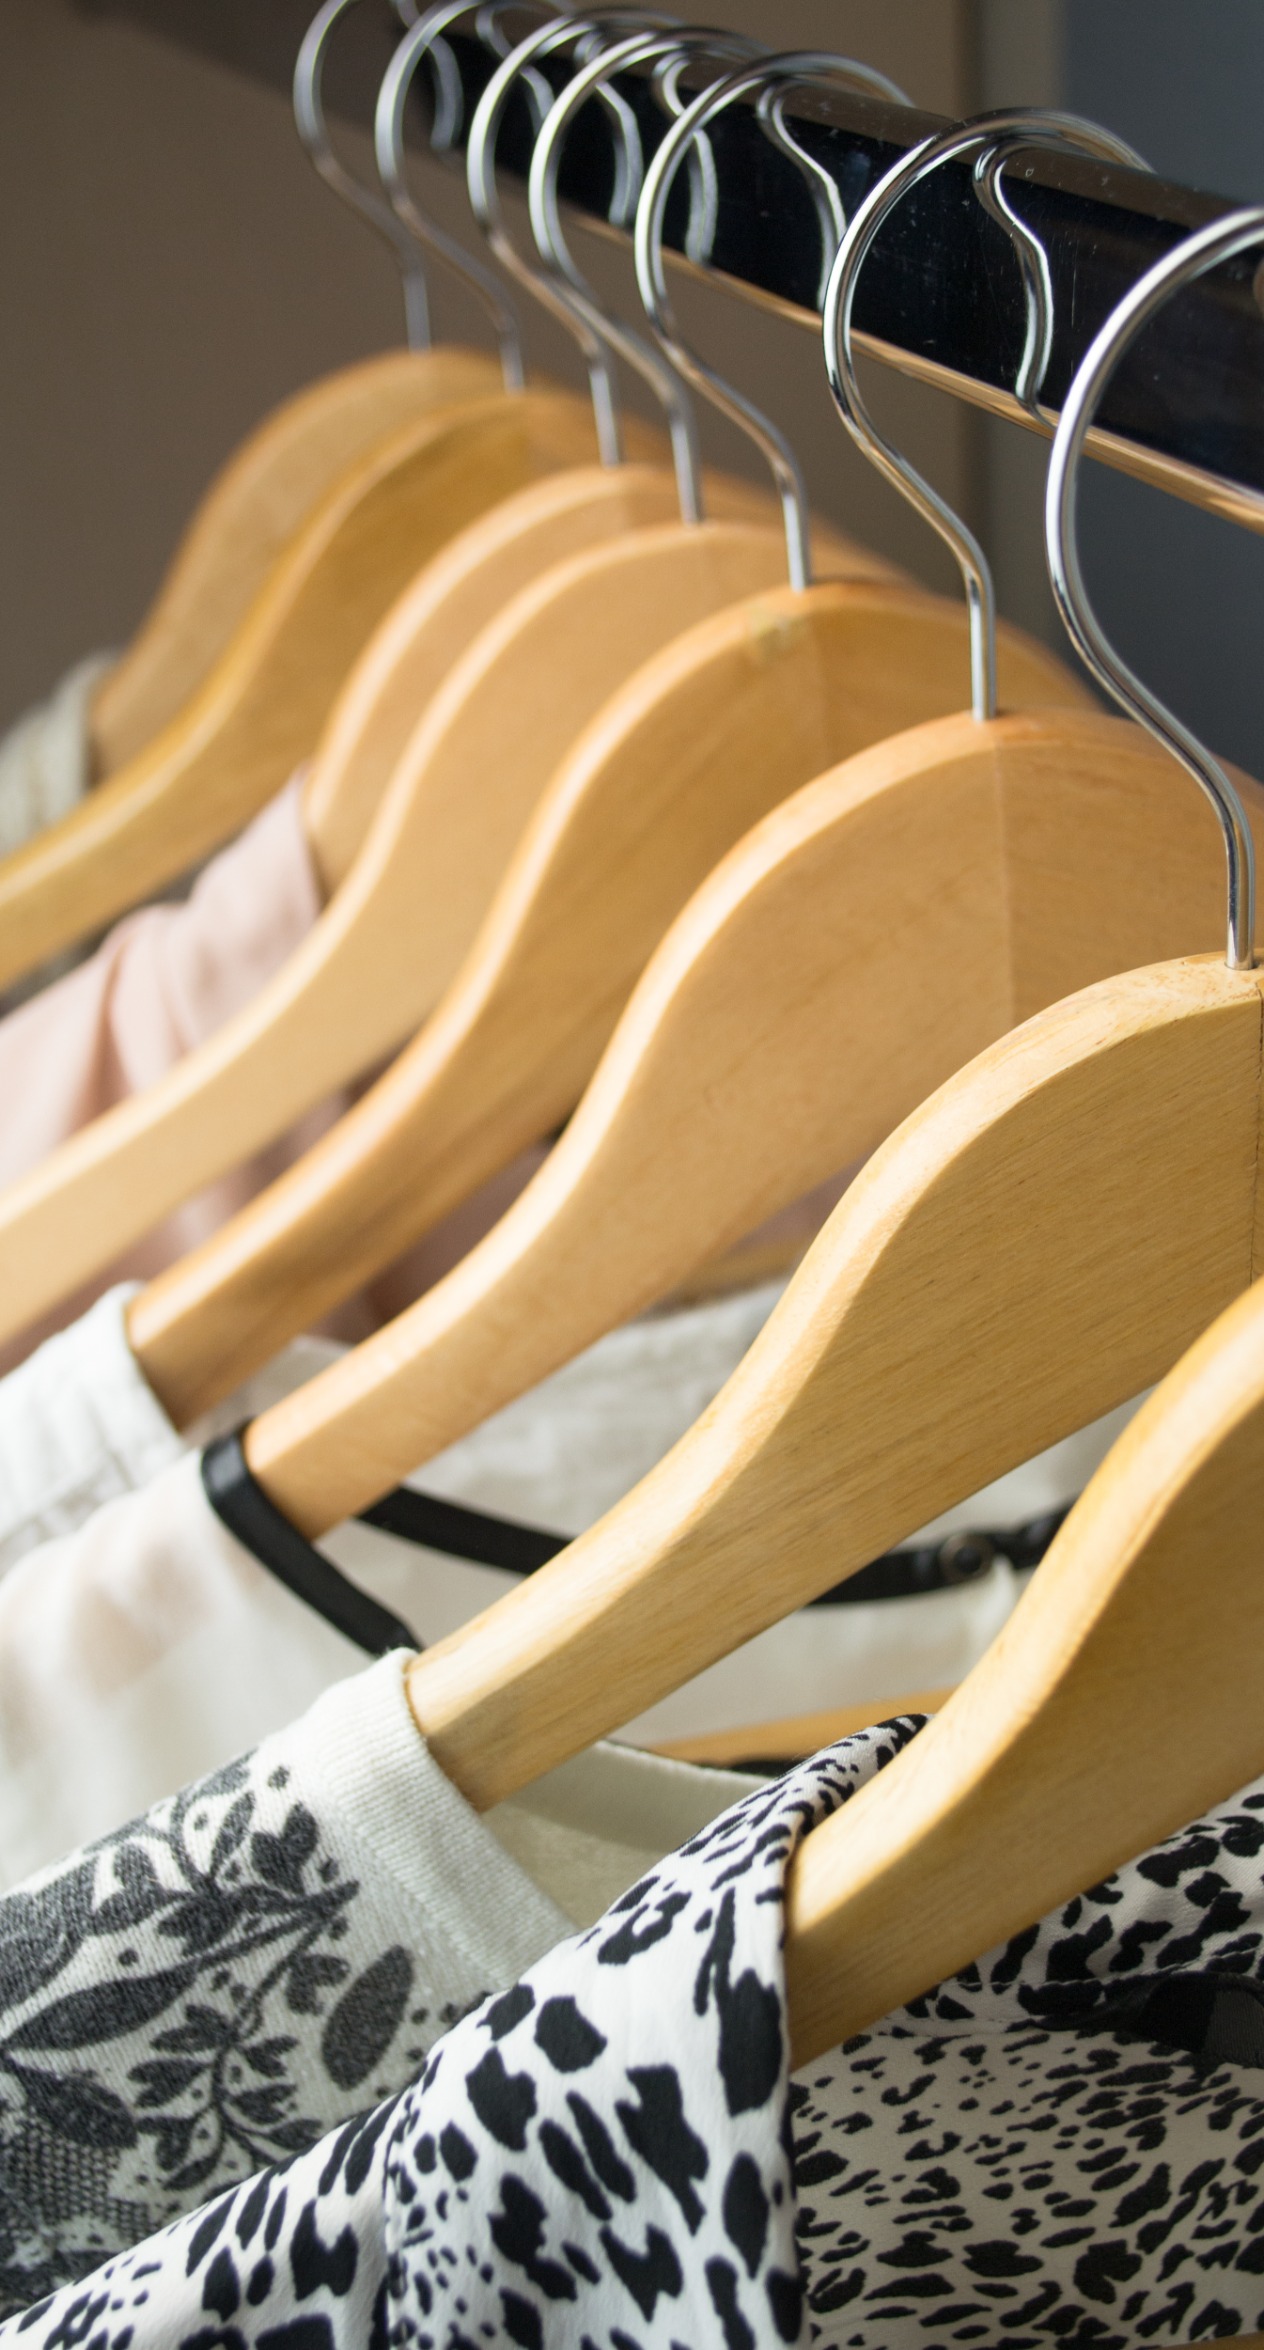 A row of clothes hangers